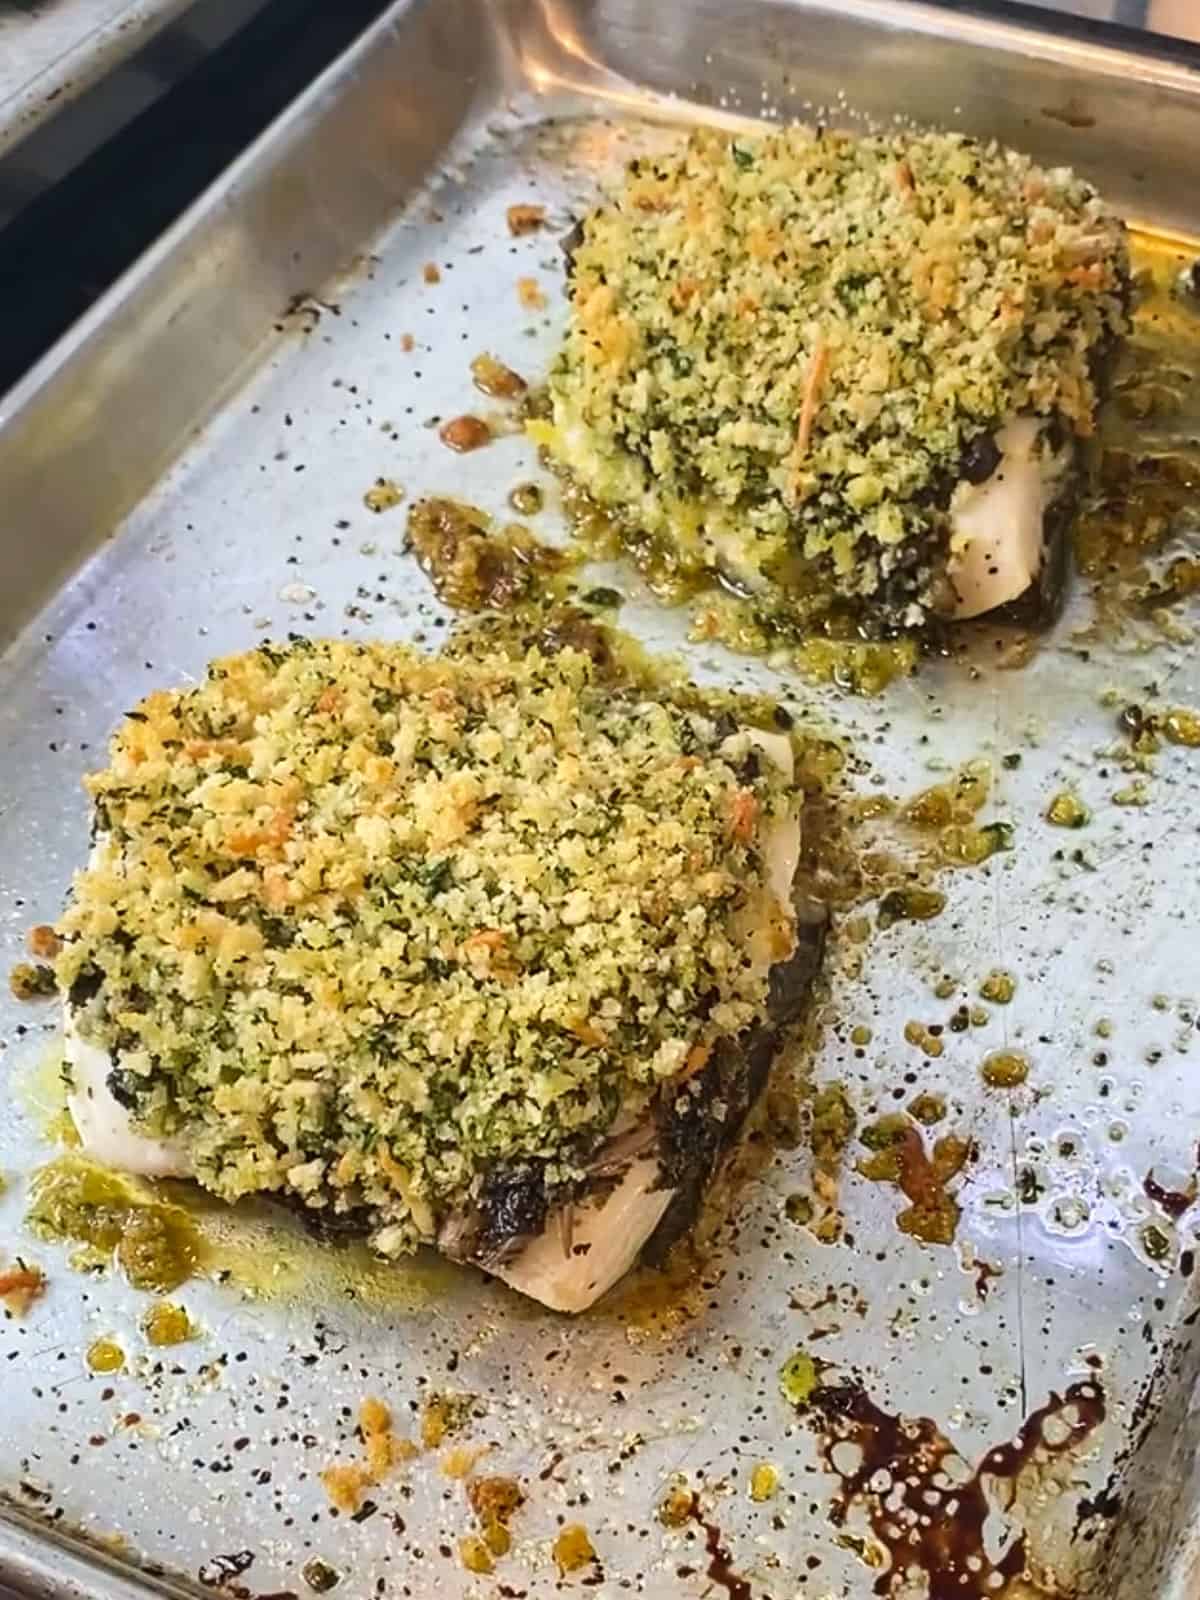 Bake the panko crusted halibut until the panko is lightly golden and crispy and the fish is just cooked through.